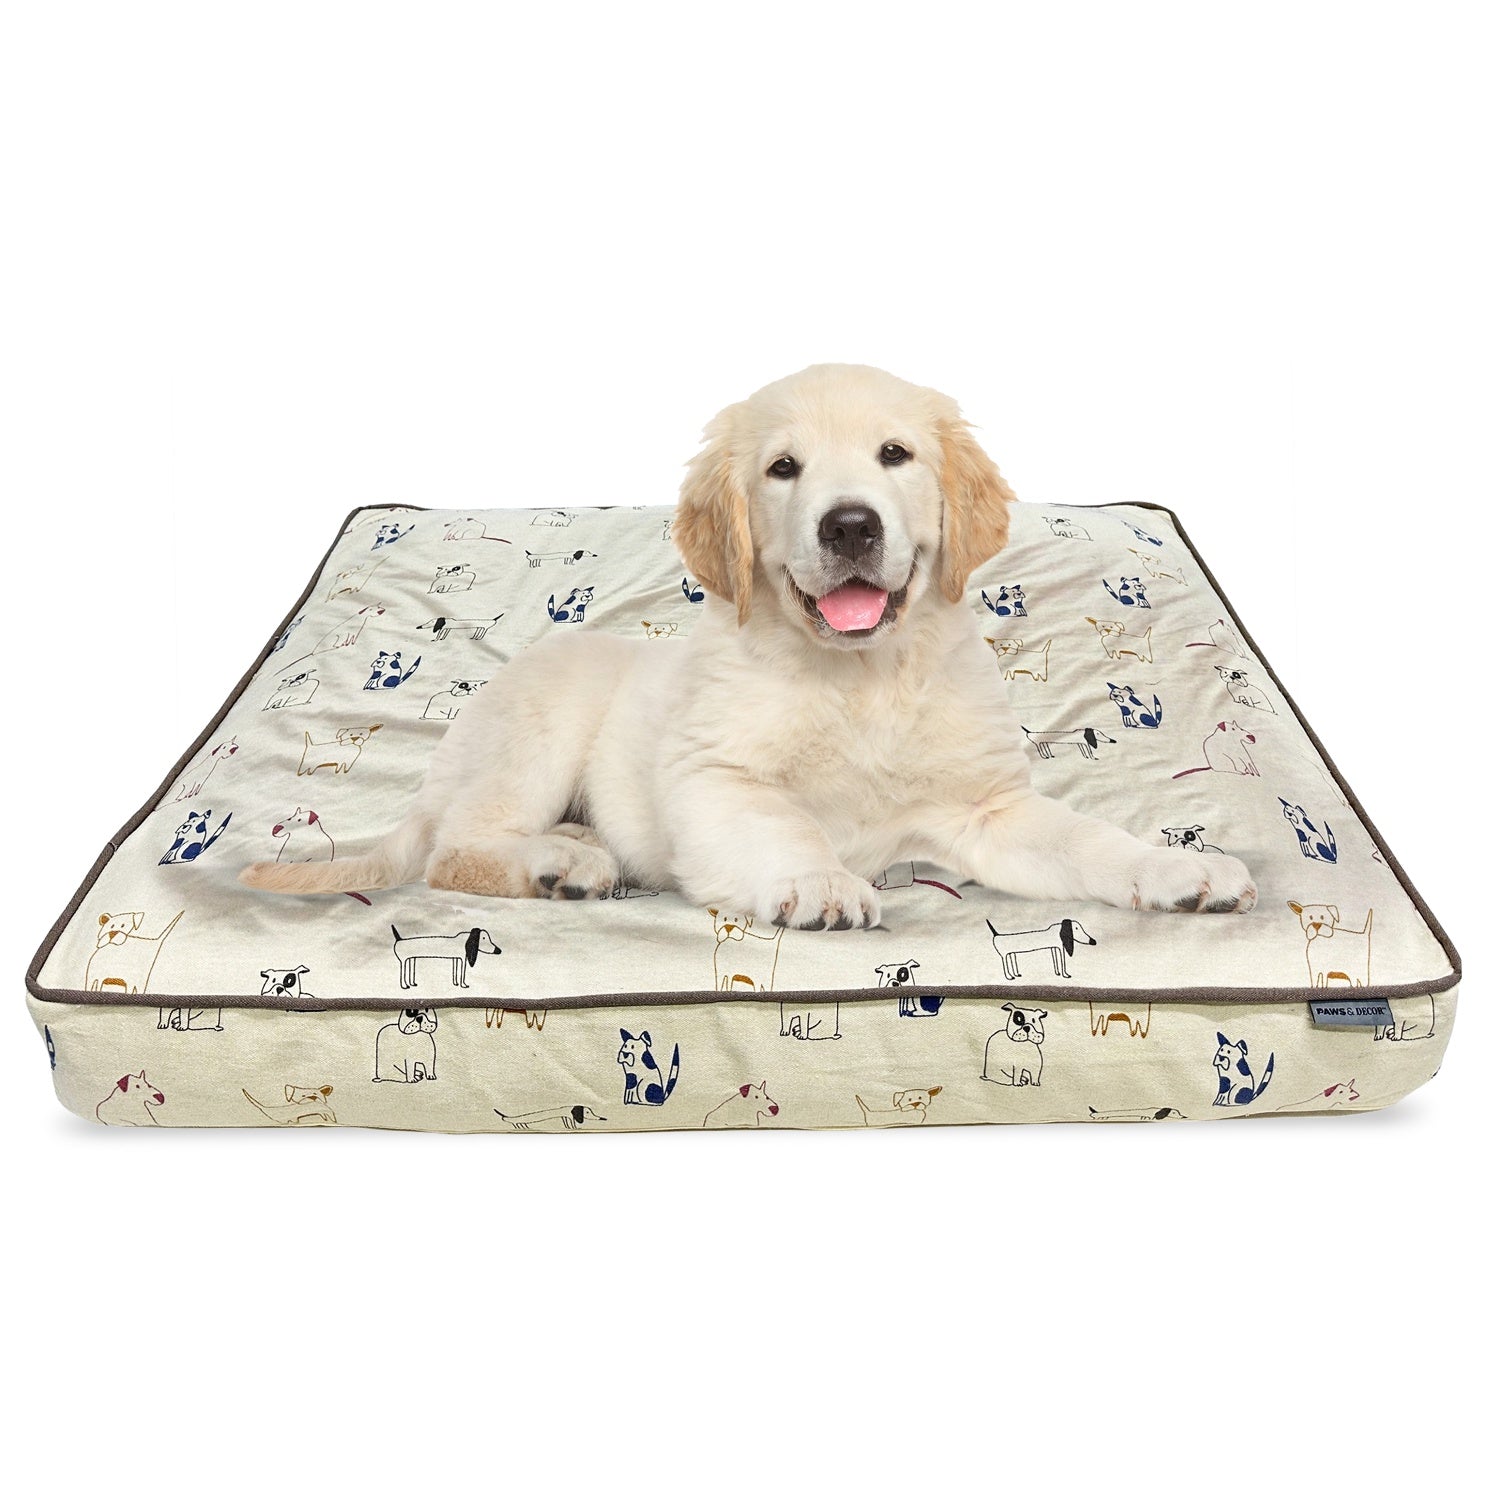 Paws and Décor Orthopedic Dog Bed, with Outlined Dog Design XL